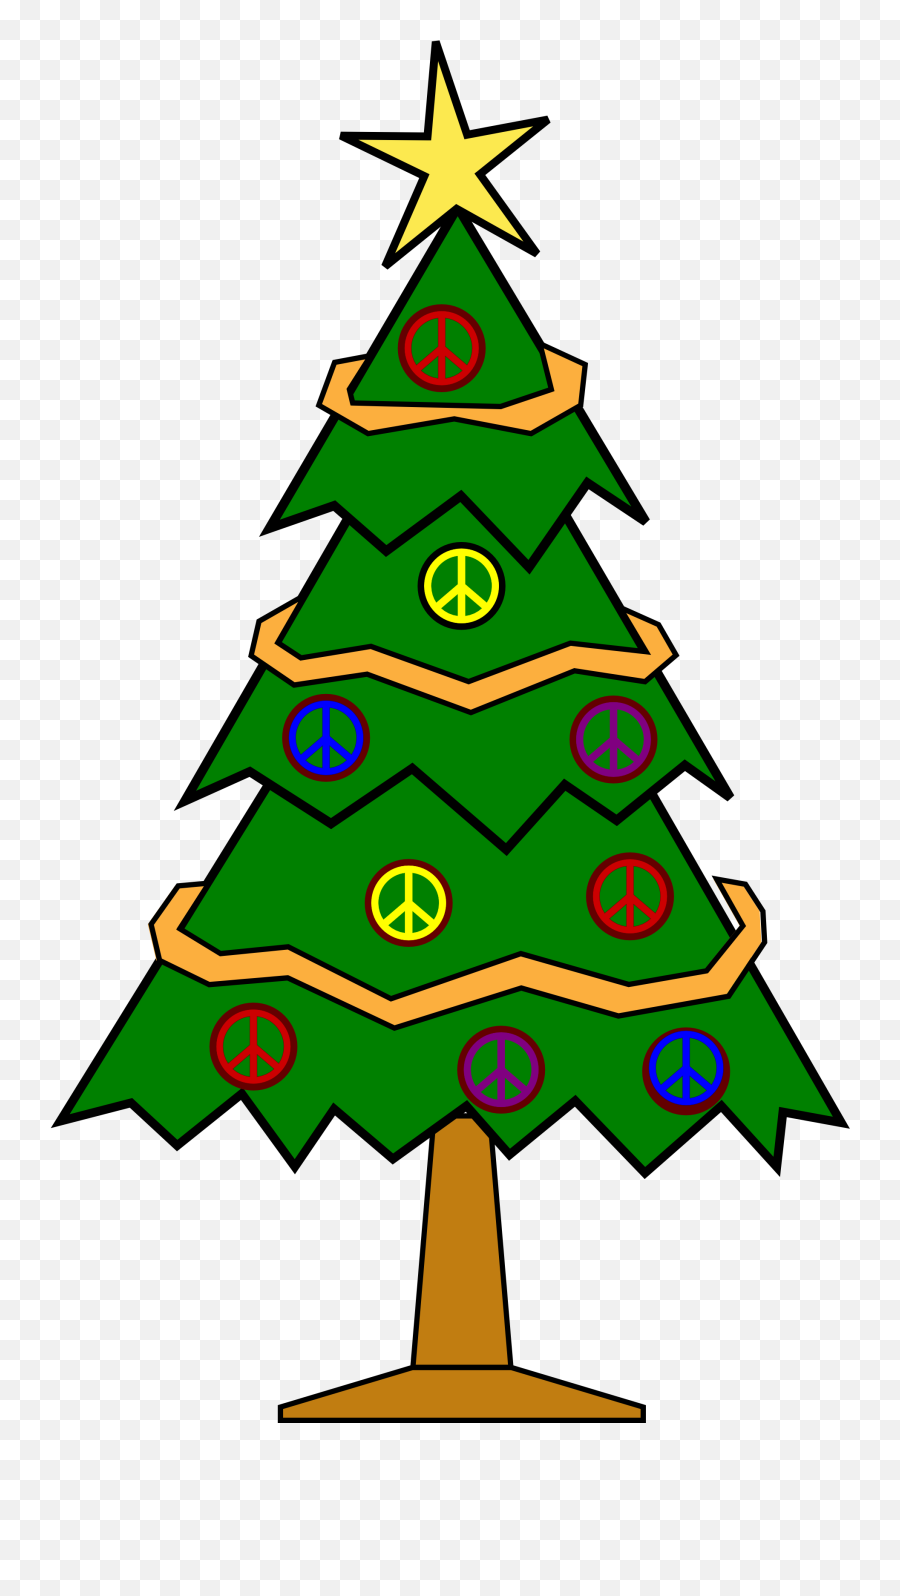 Clipartsilhouette - Free Clipart And Silhouette Images Clipart Christmas Tree Emoji,Christmas Tree Emoticon